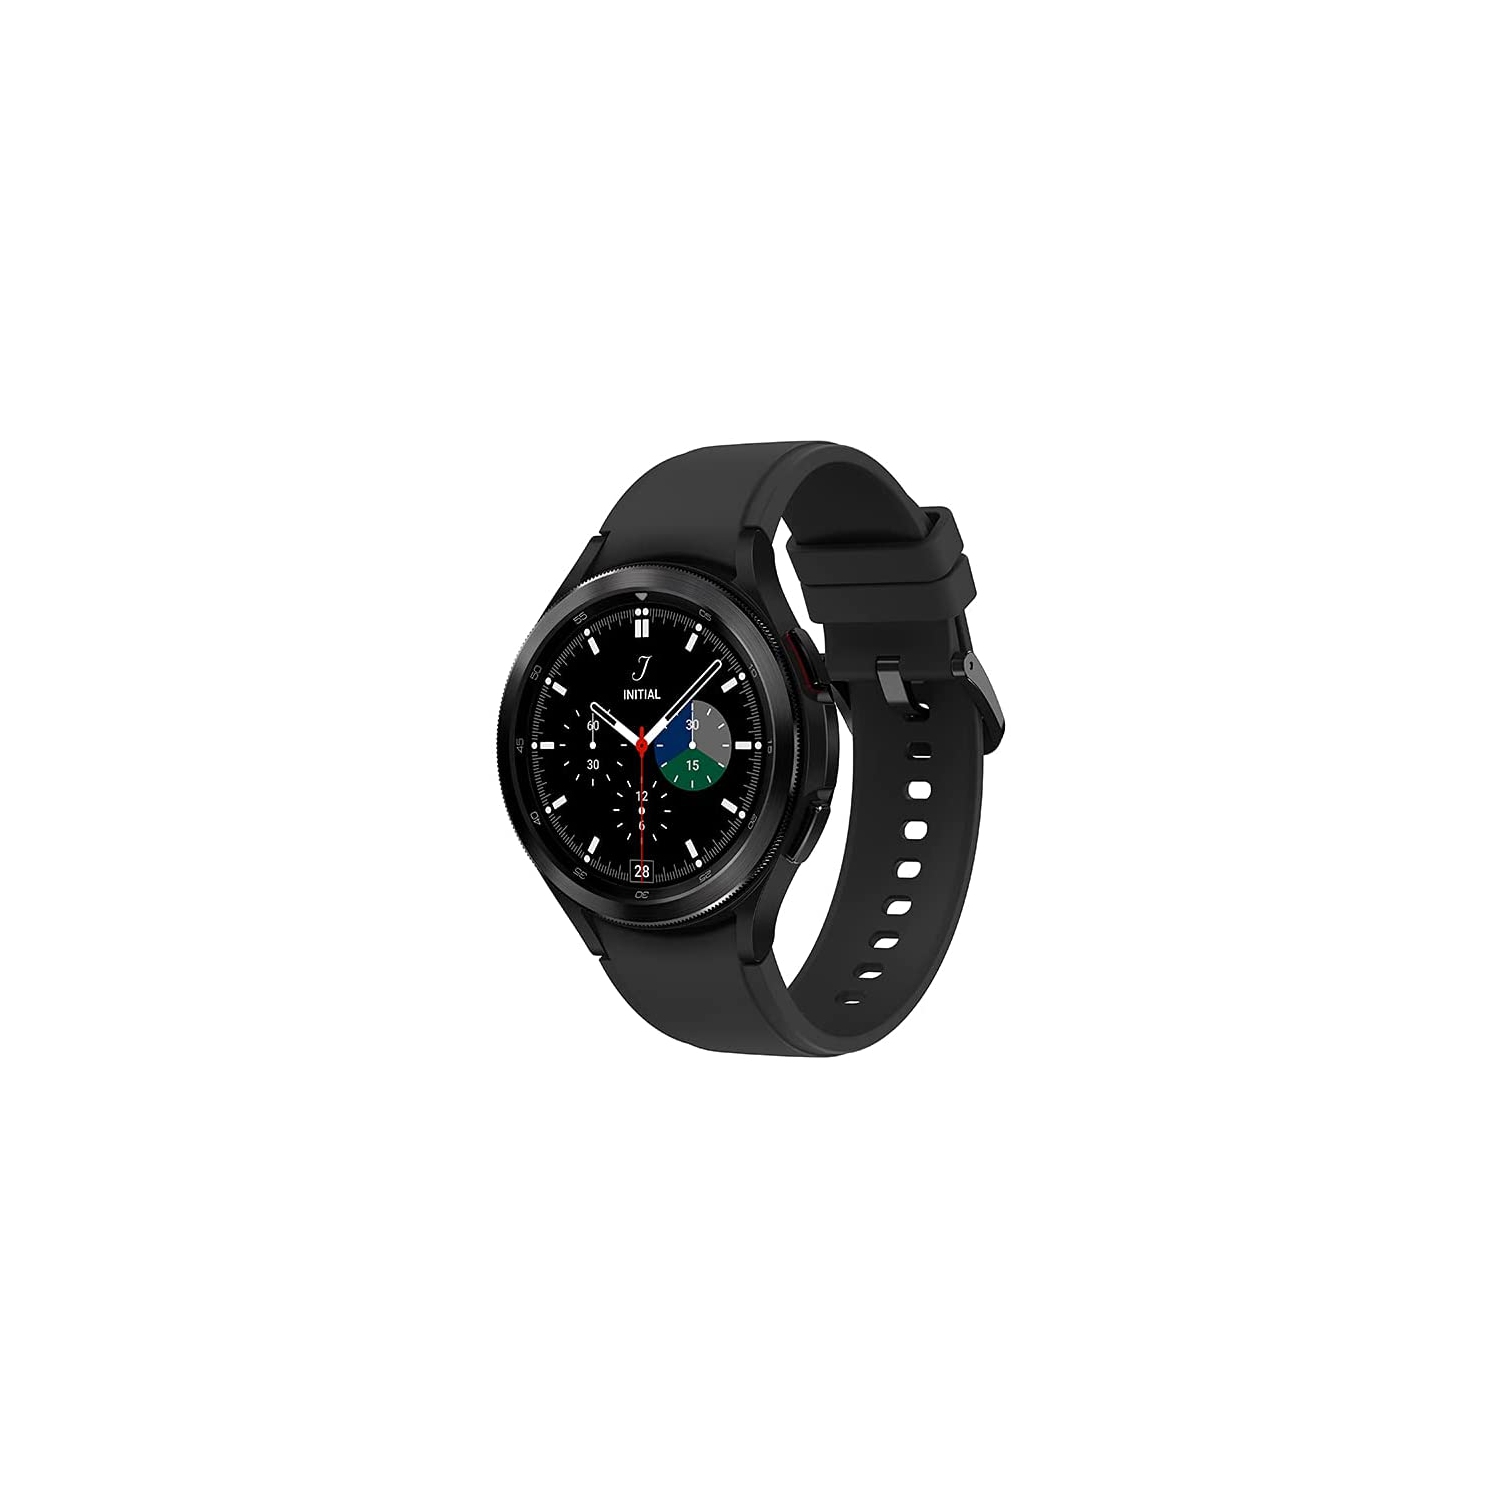 Samsung- Galaxy Watch4 Classic - 46mm Black Stainless Steel - Google Wear OS - 1.36" Round Display + Rotating Bezel, Fitness Tracking, Sleep Management- Brand New- Black